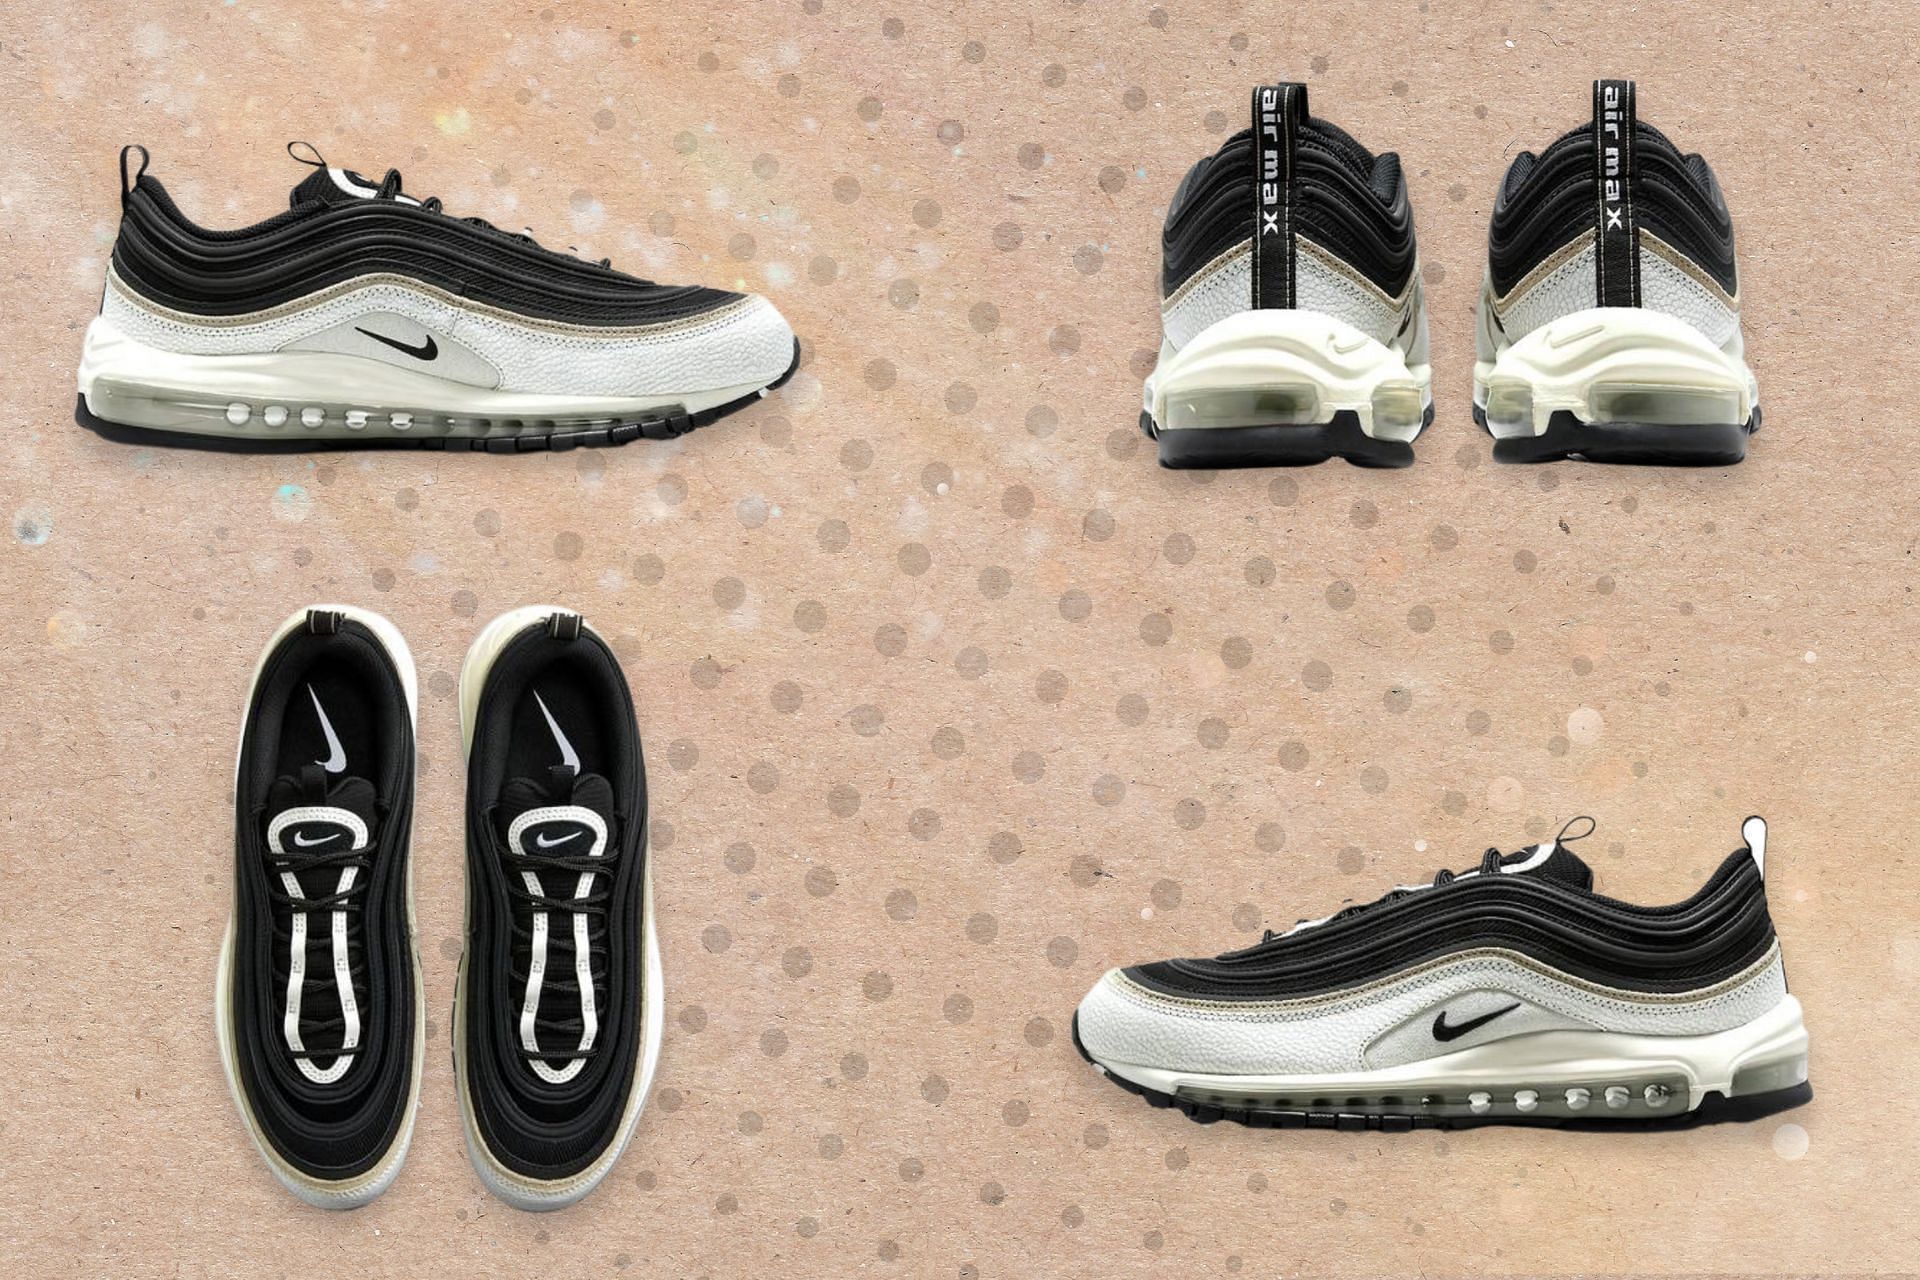 Here&#039;s a detailed look at the upcoming Nike Air Max 97 Black/White shoes (Image via Sportskeeda)